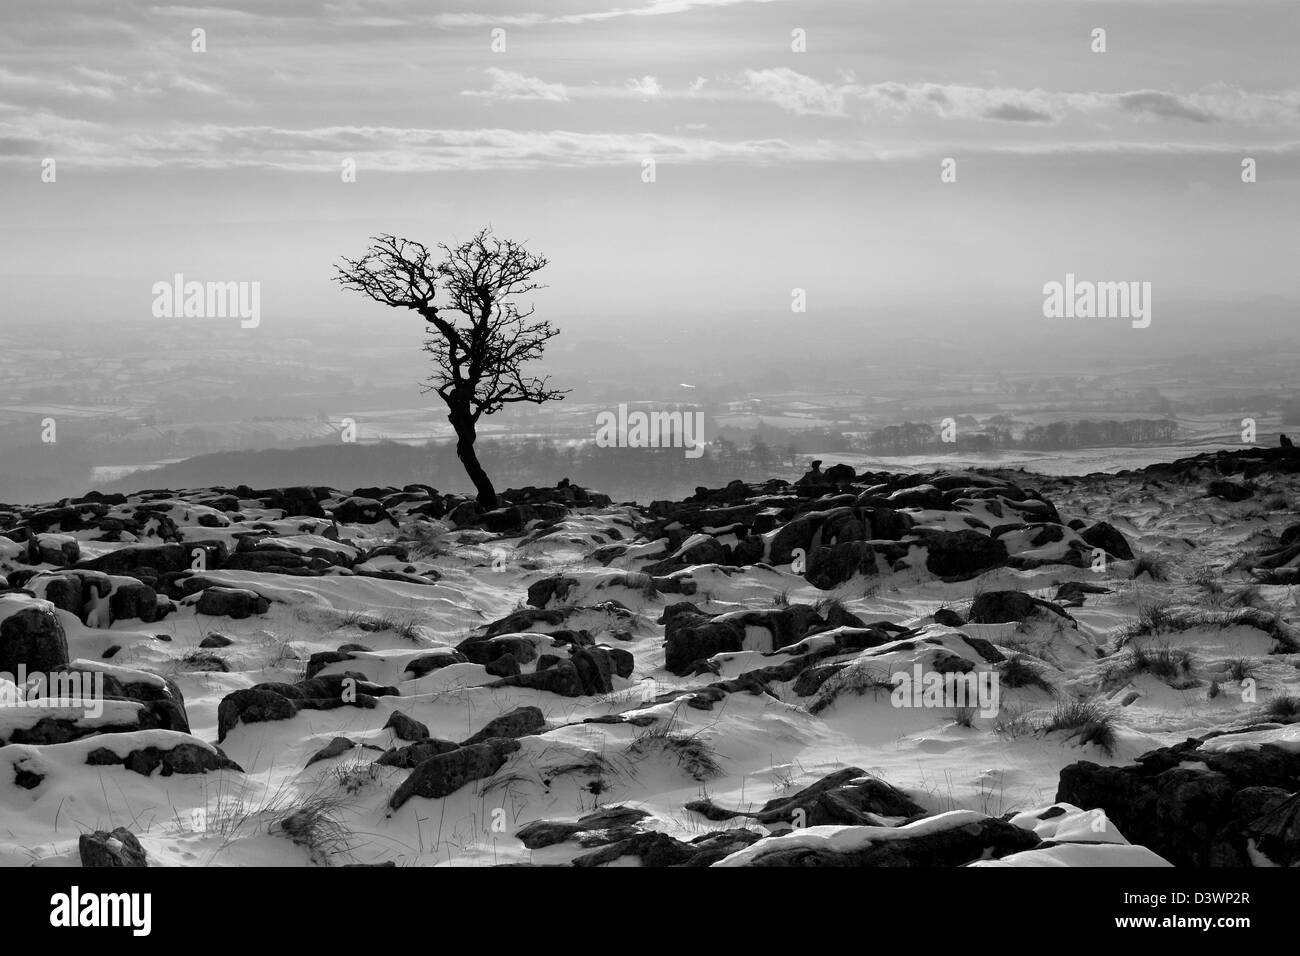 A snowy, wintertime view of a tree on the limestone pavement at Twistleton Scars, in the Yorkshire Dales National Park, England Stock Photo